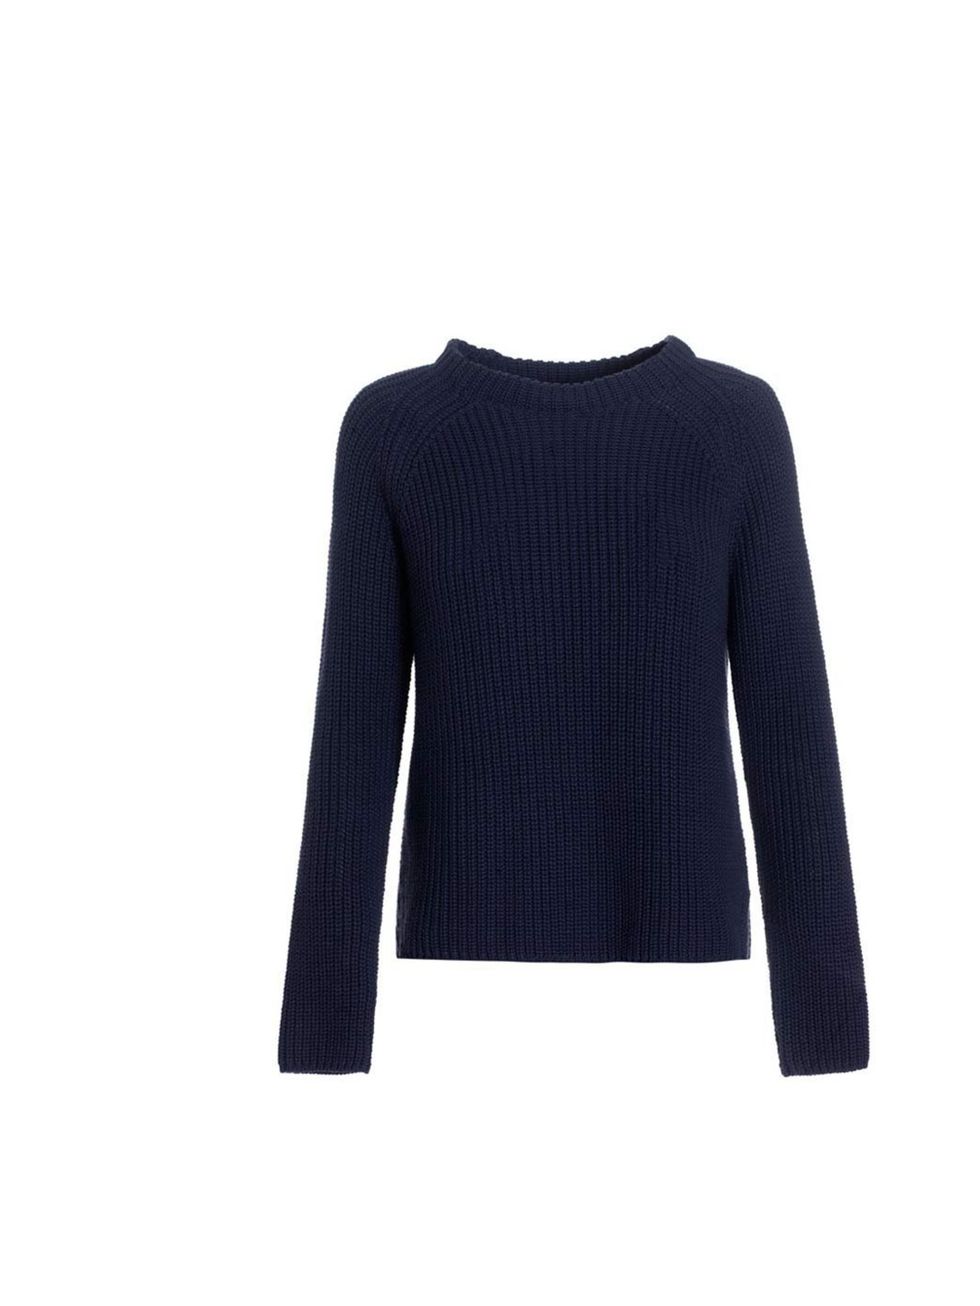 <p>This navy knit is an instant wardrobe staple: you'll never want to take it off.</p><p><a href="http://www.meandem.com/collection/new_arrivals/boyfriend-jumper-navy/products_id/1740/cPath/1007_1008_1149">Me+Em</a> jumper, £88</p>